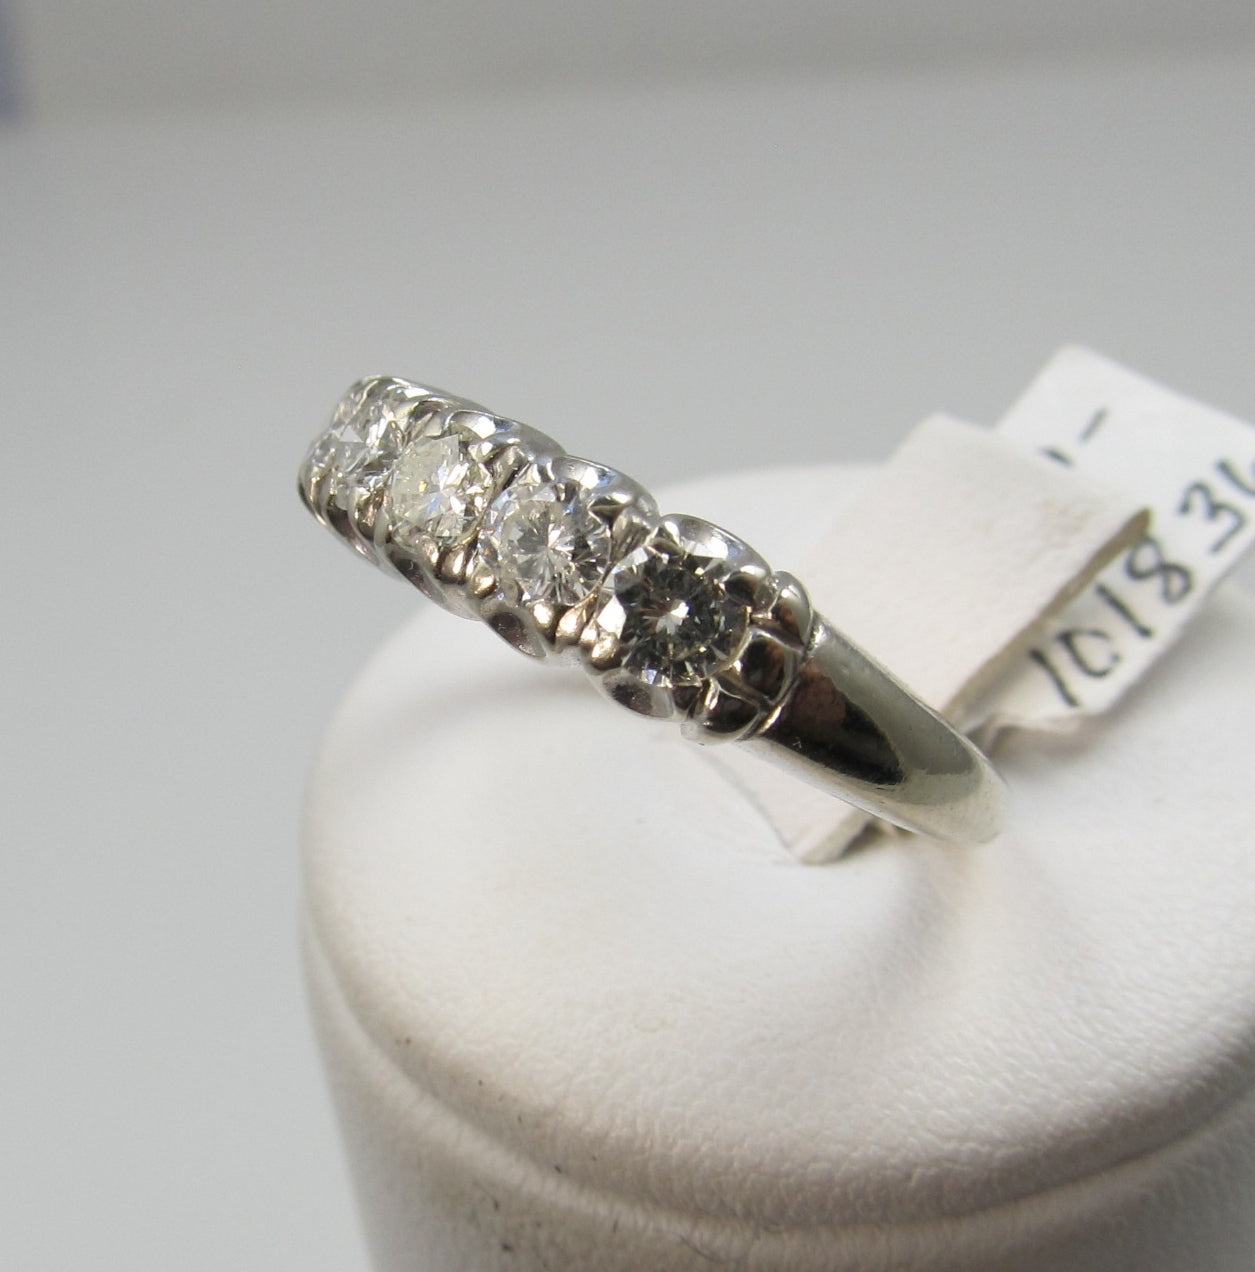 Vintage 14k White Gold Band With 1ct In Diamonds, Circa 1940